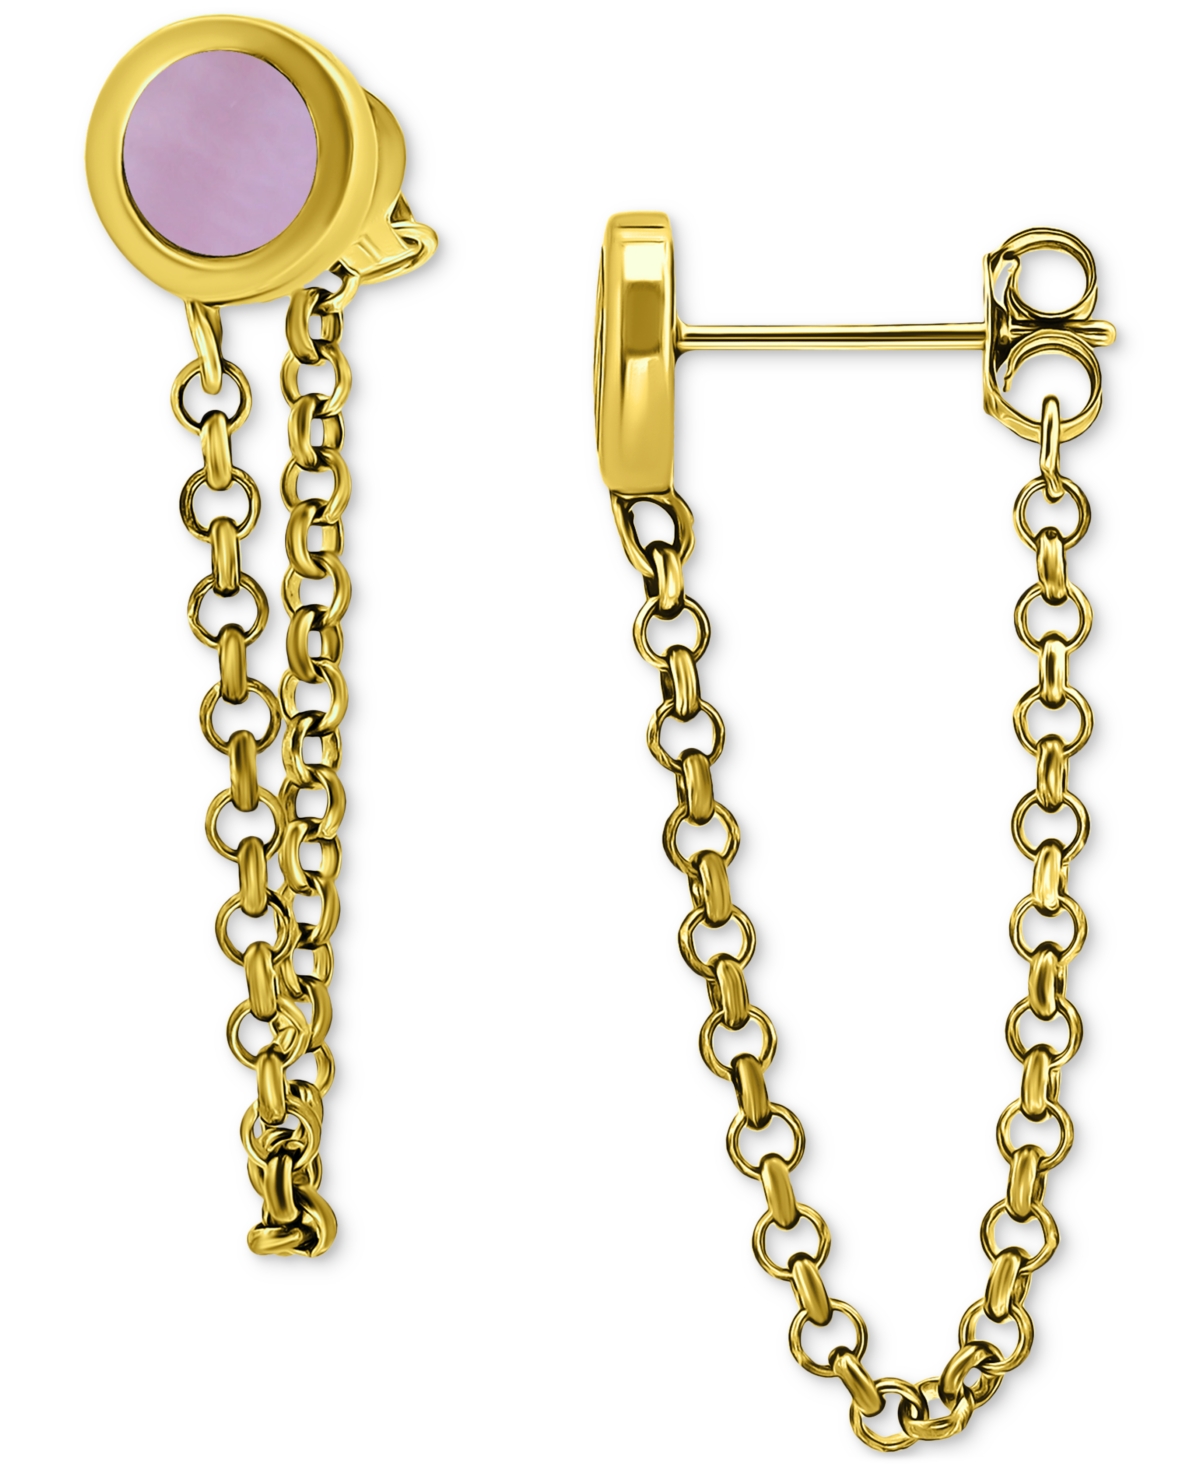 Abalone Chain Front and Back Drop Earrings in 18k Gold-Plated Sterling Silver (Also in Pink Shell), Created for Macy's - Abalone